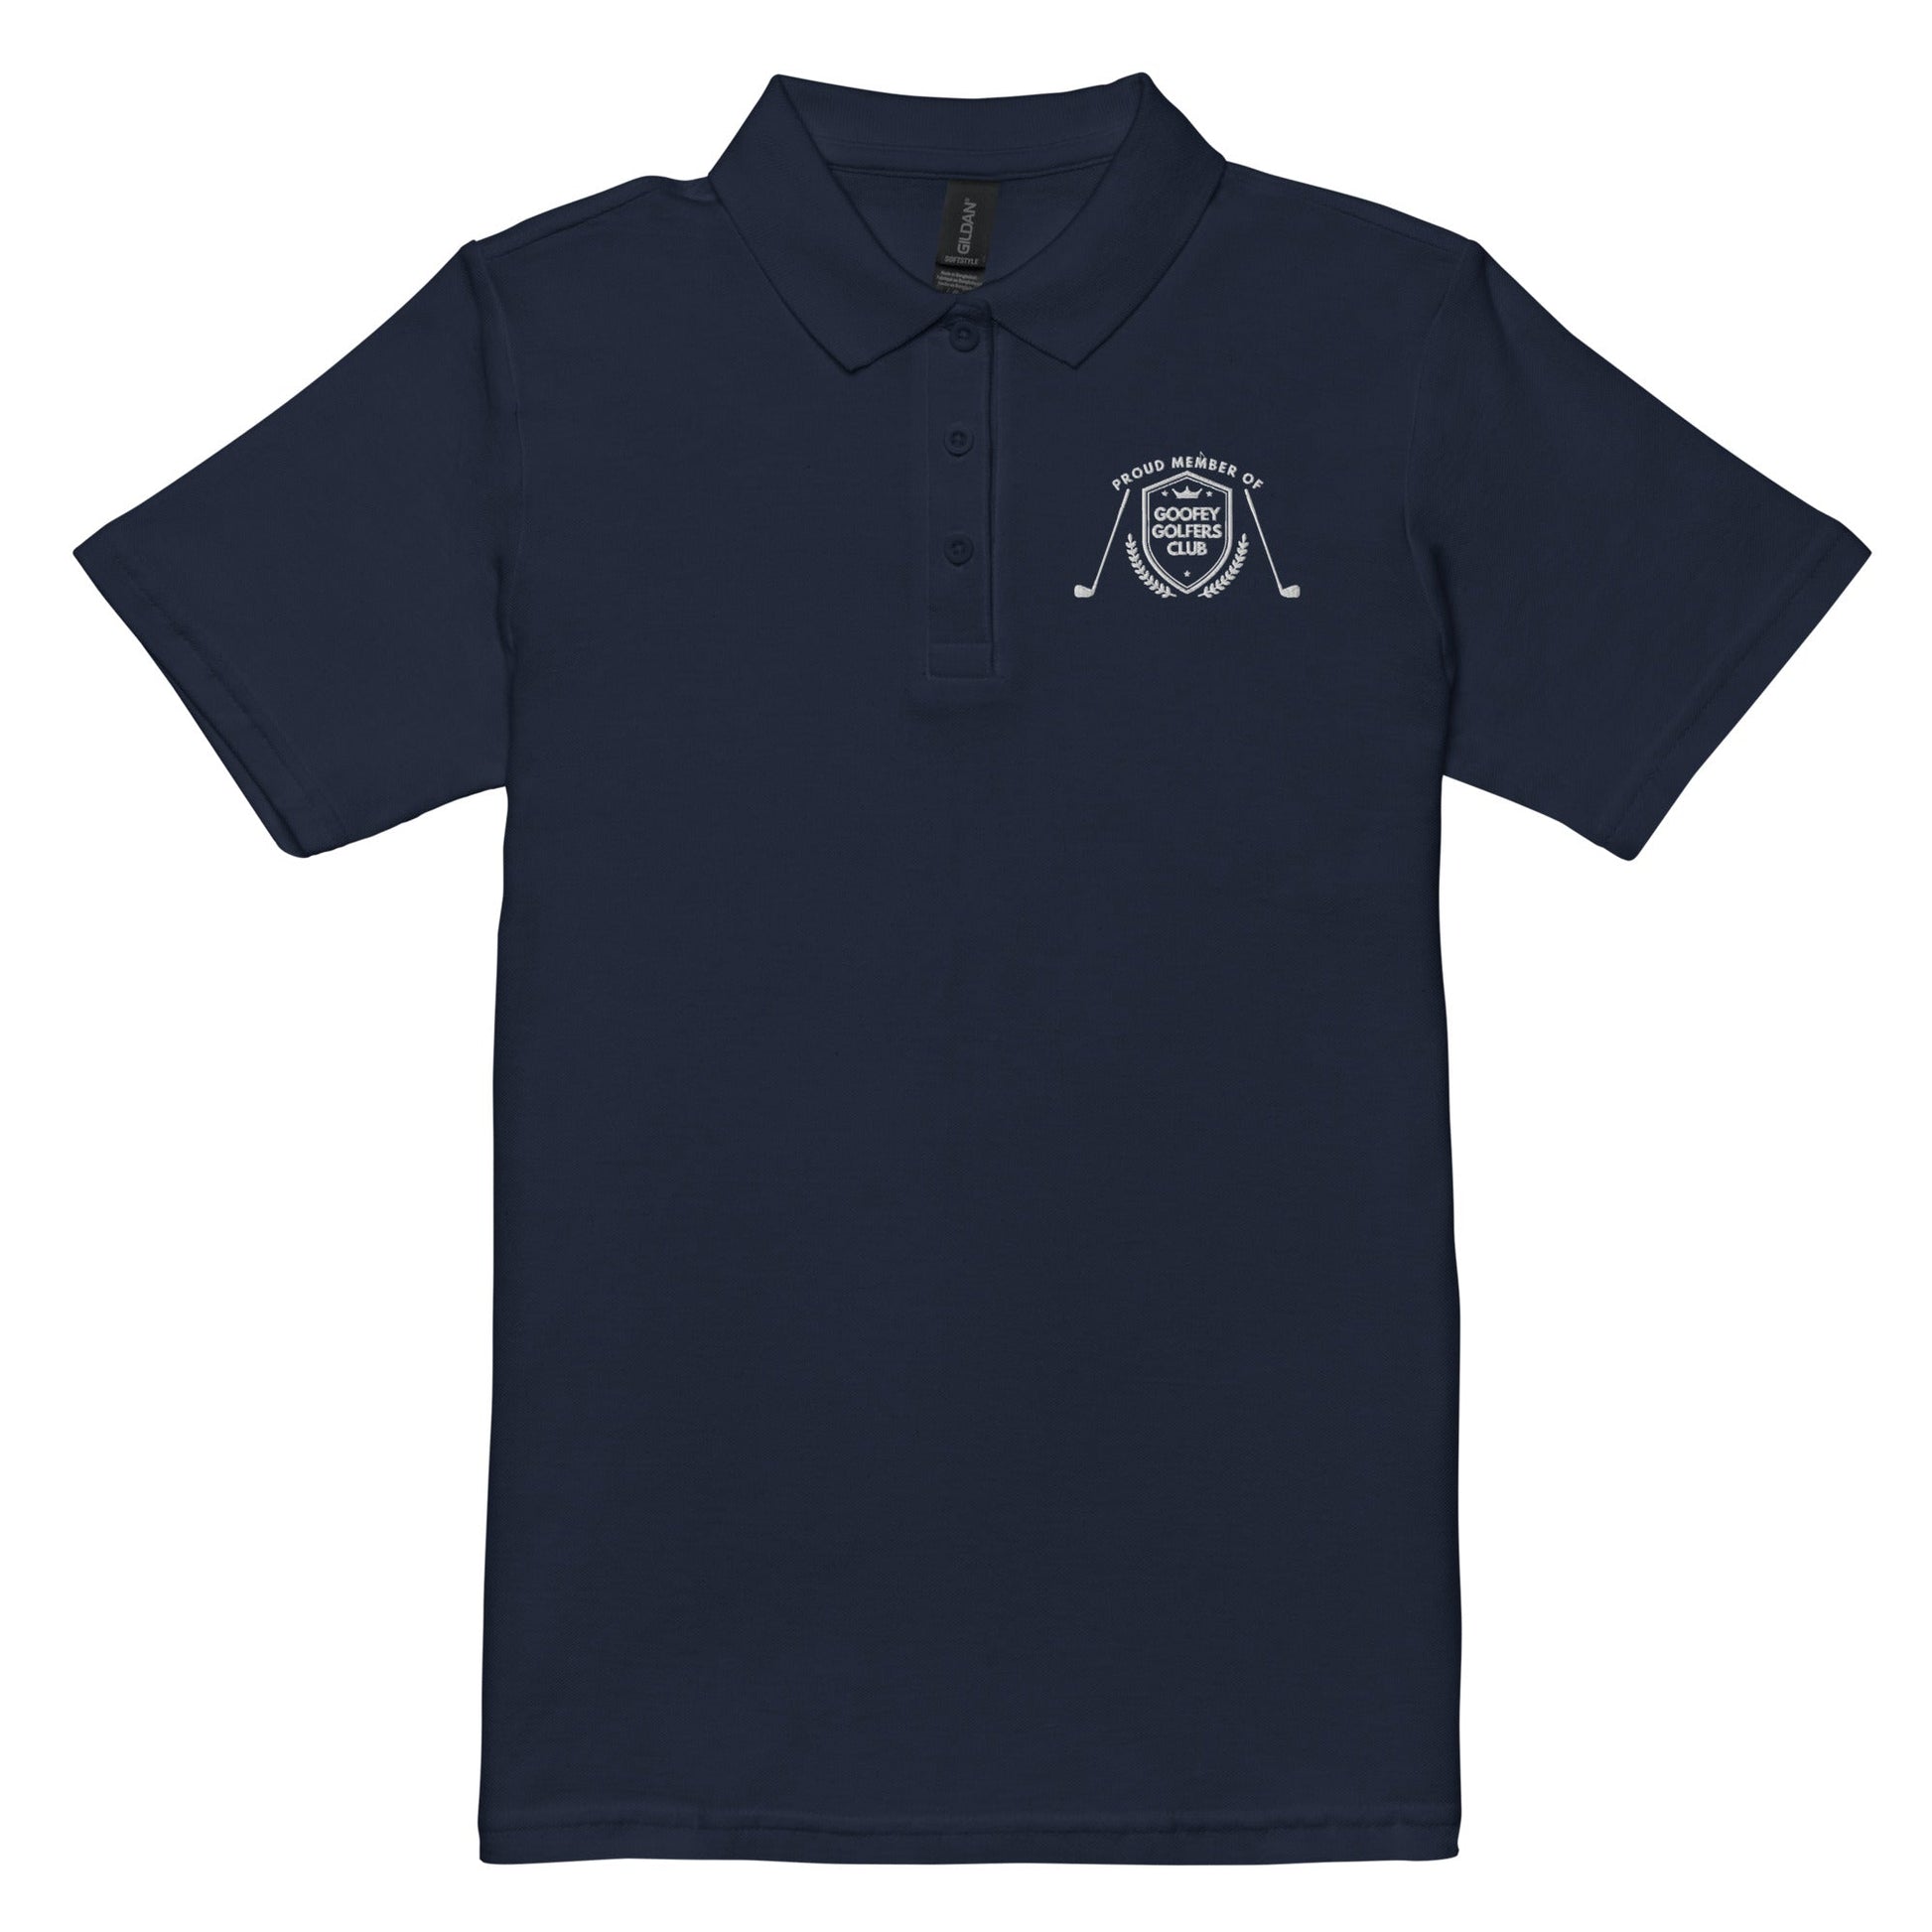 Funny Golfer Gifts  Womens Polo Navy / S Proud Member of the Goofey Golfers Club Women’s Pique Polo Shirt